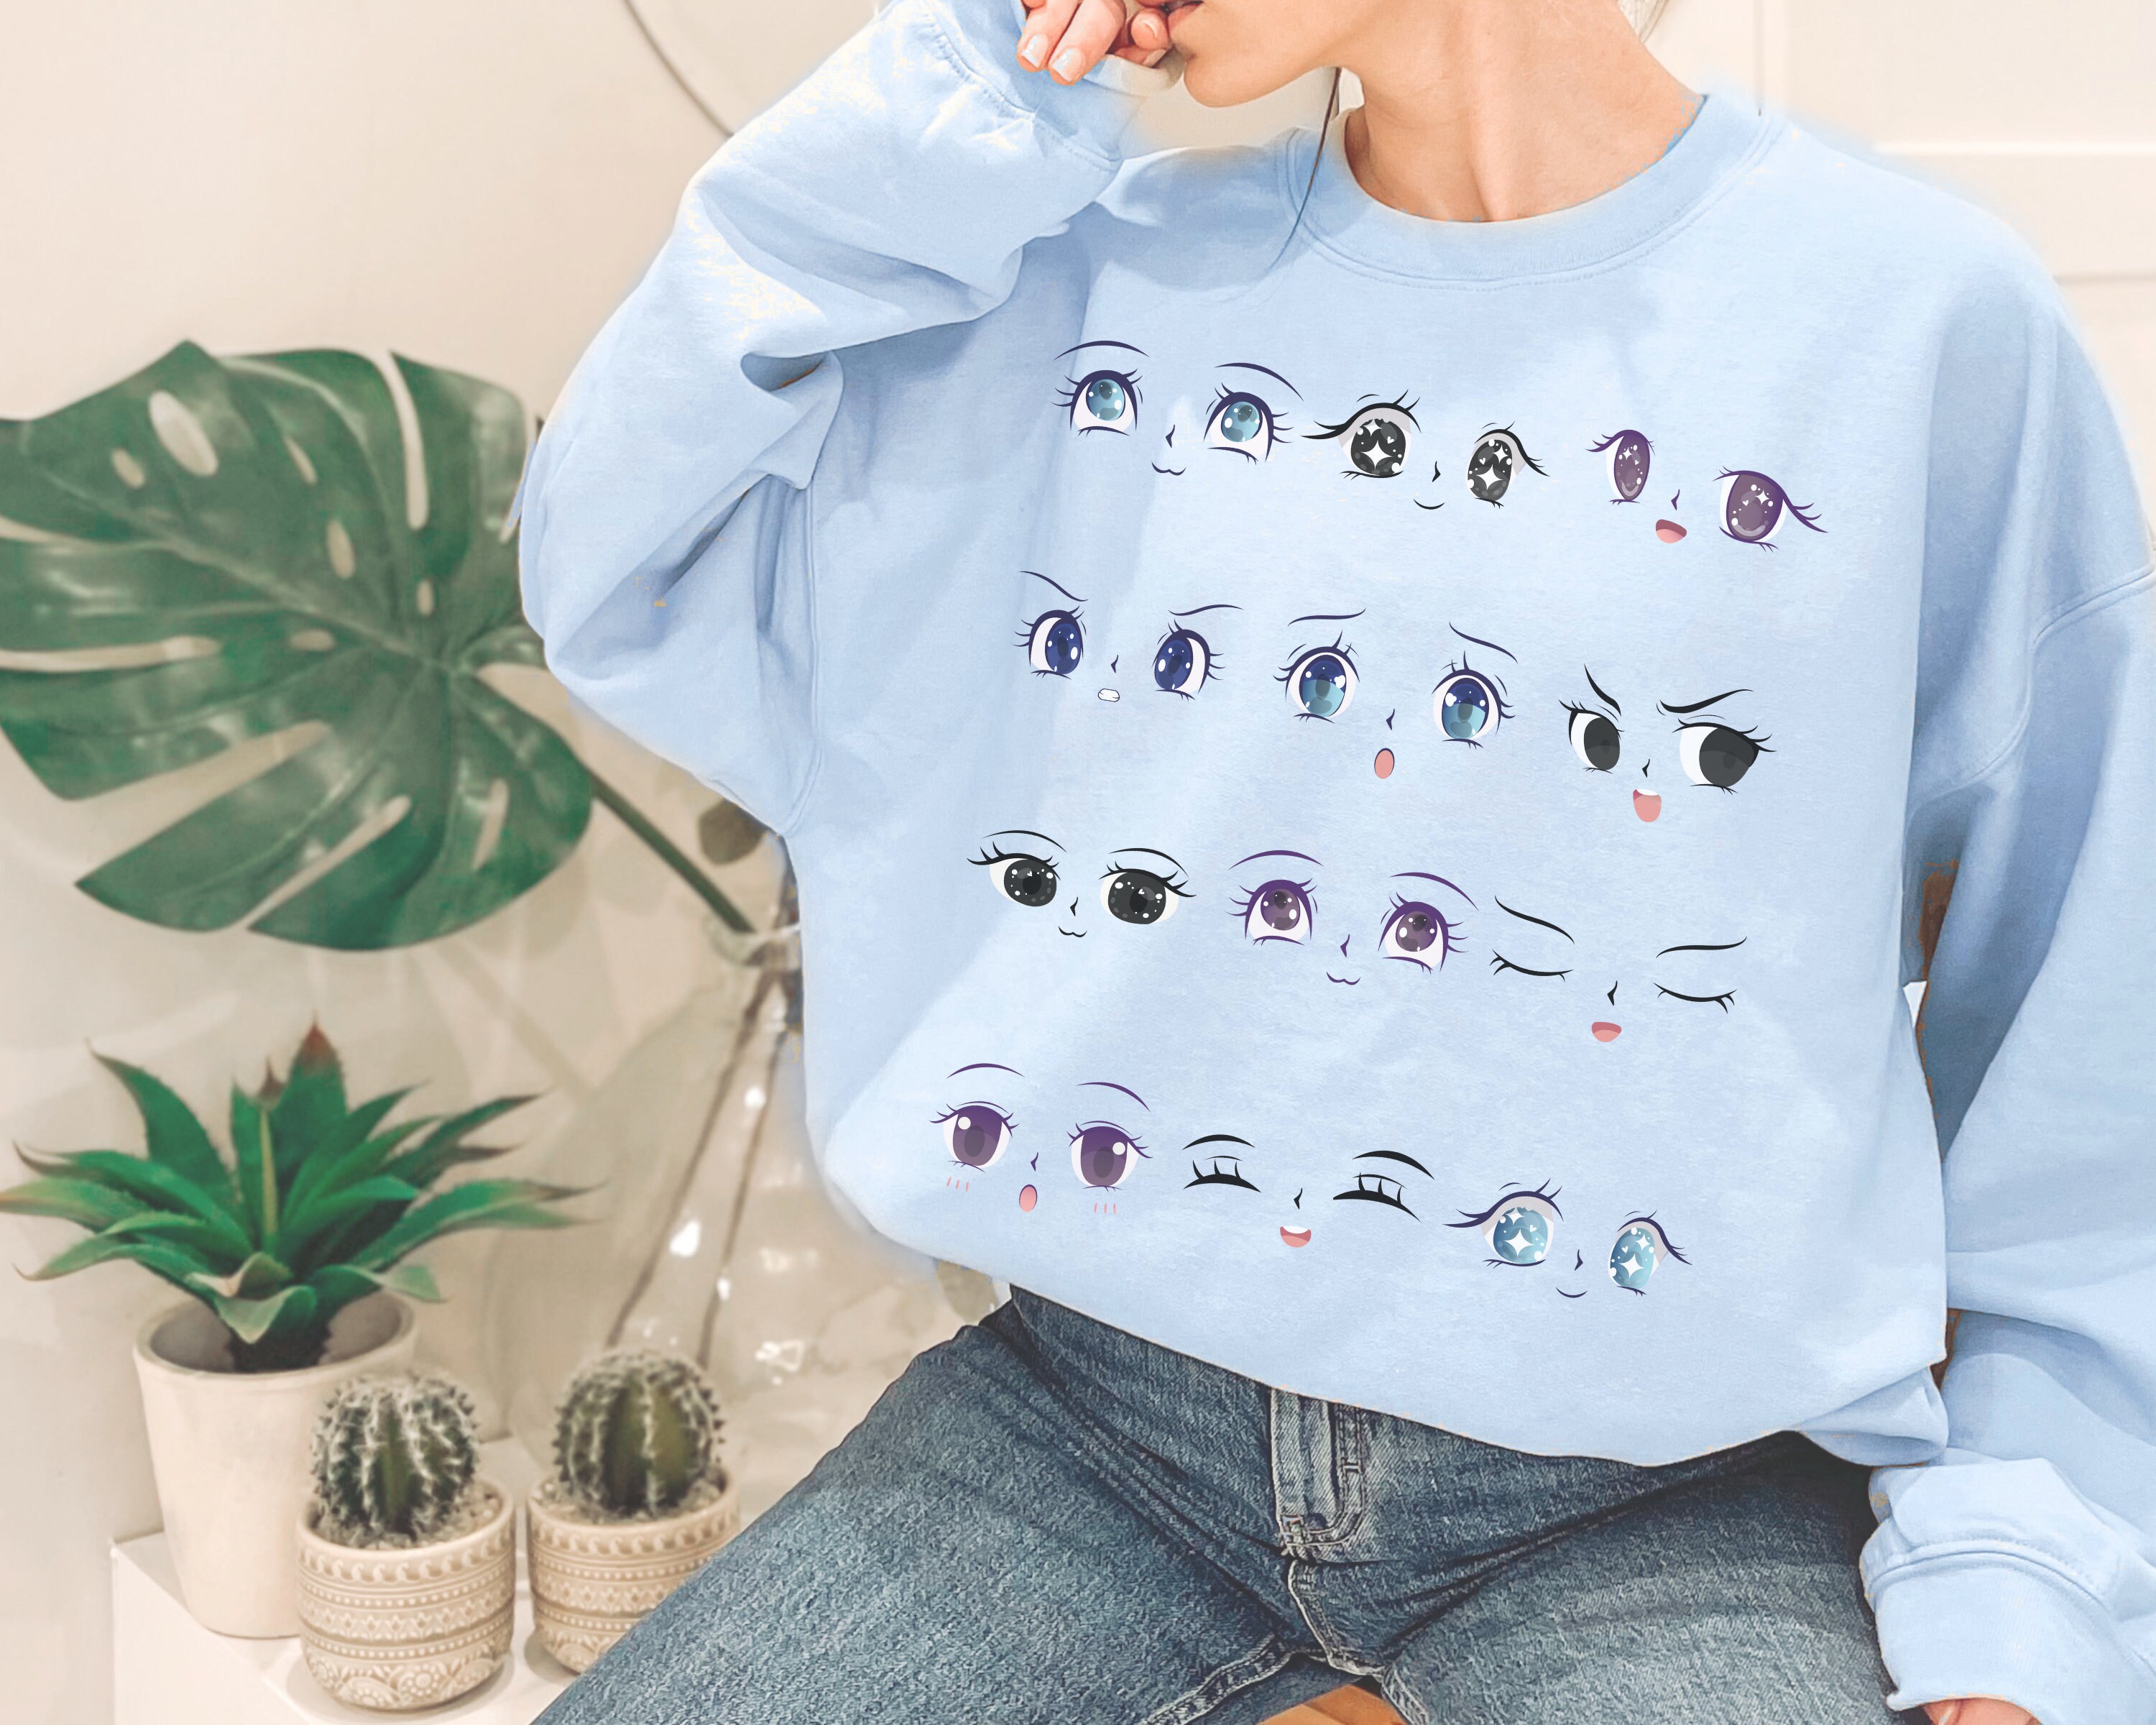 Amazoncom Subtle Anime Merch for Teen Men and Women Anime Gifts  Sweatshirt  Clothing Shoes  Jewelry